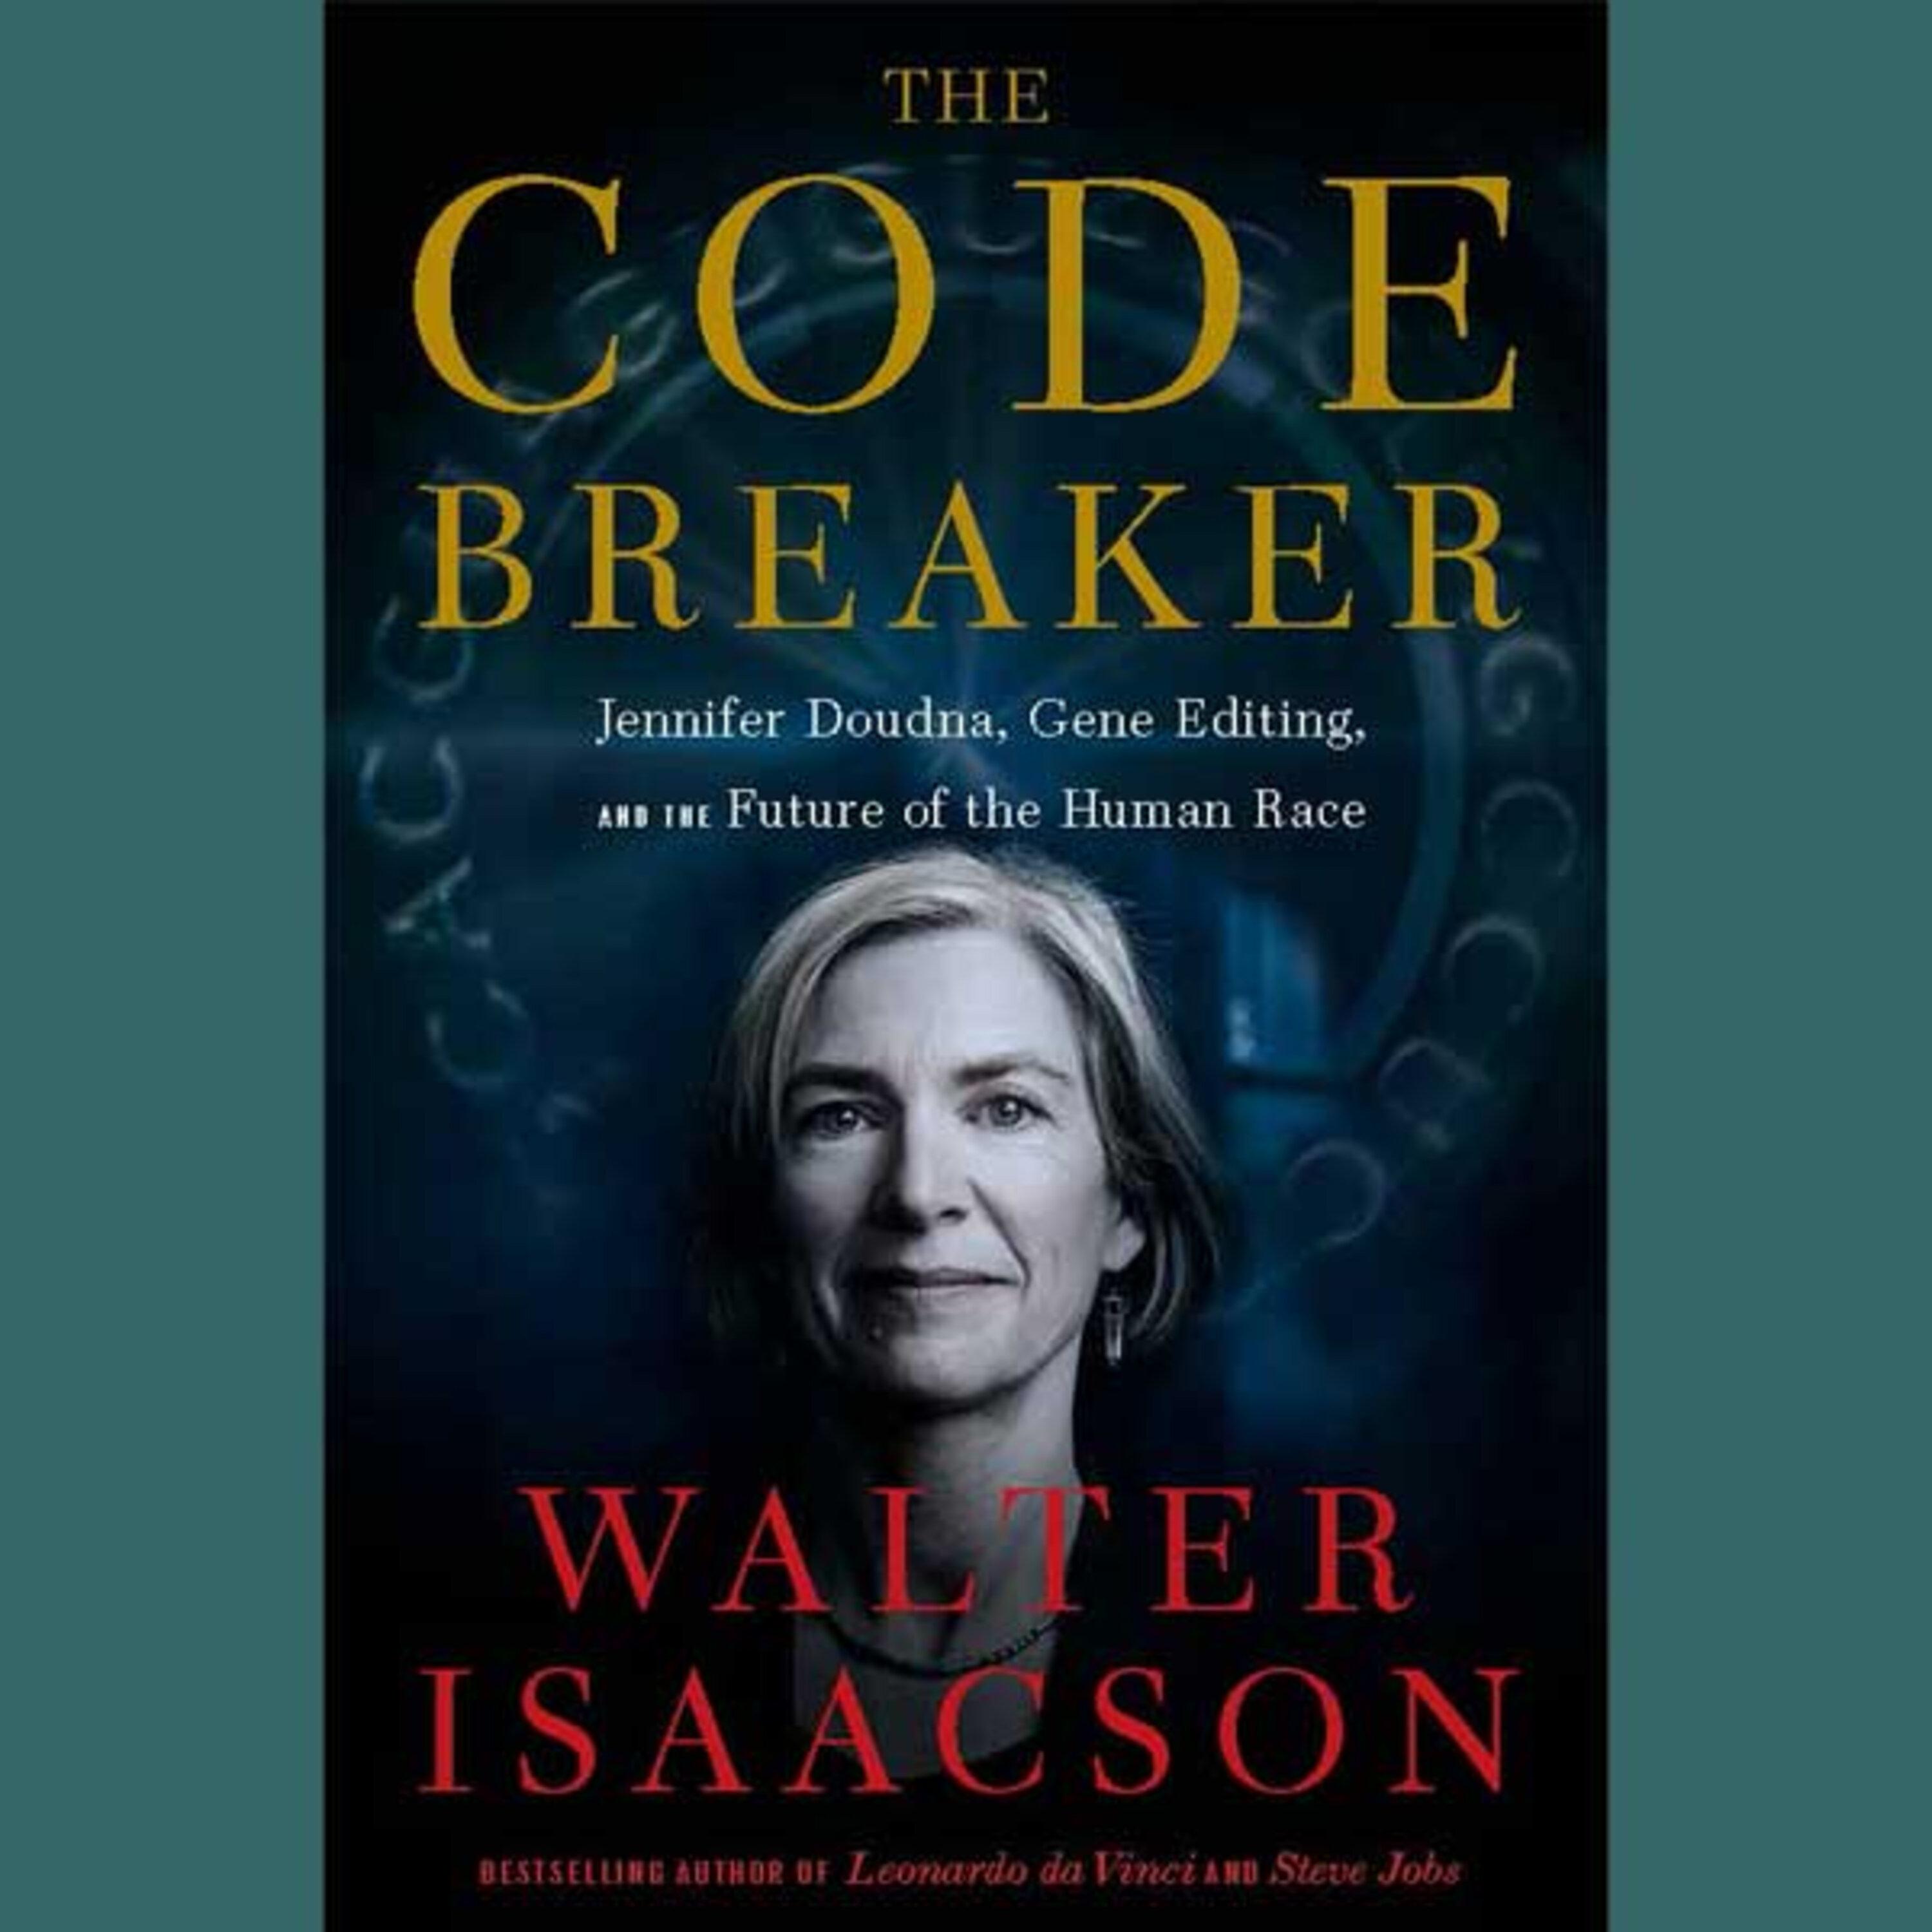 Thumbnail for "Louisiana Considered: Walter Isaacson On His Book “The Code Breaker,” Food Writer Ian McNulty Dishes On Mother's Day Memories".